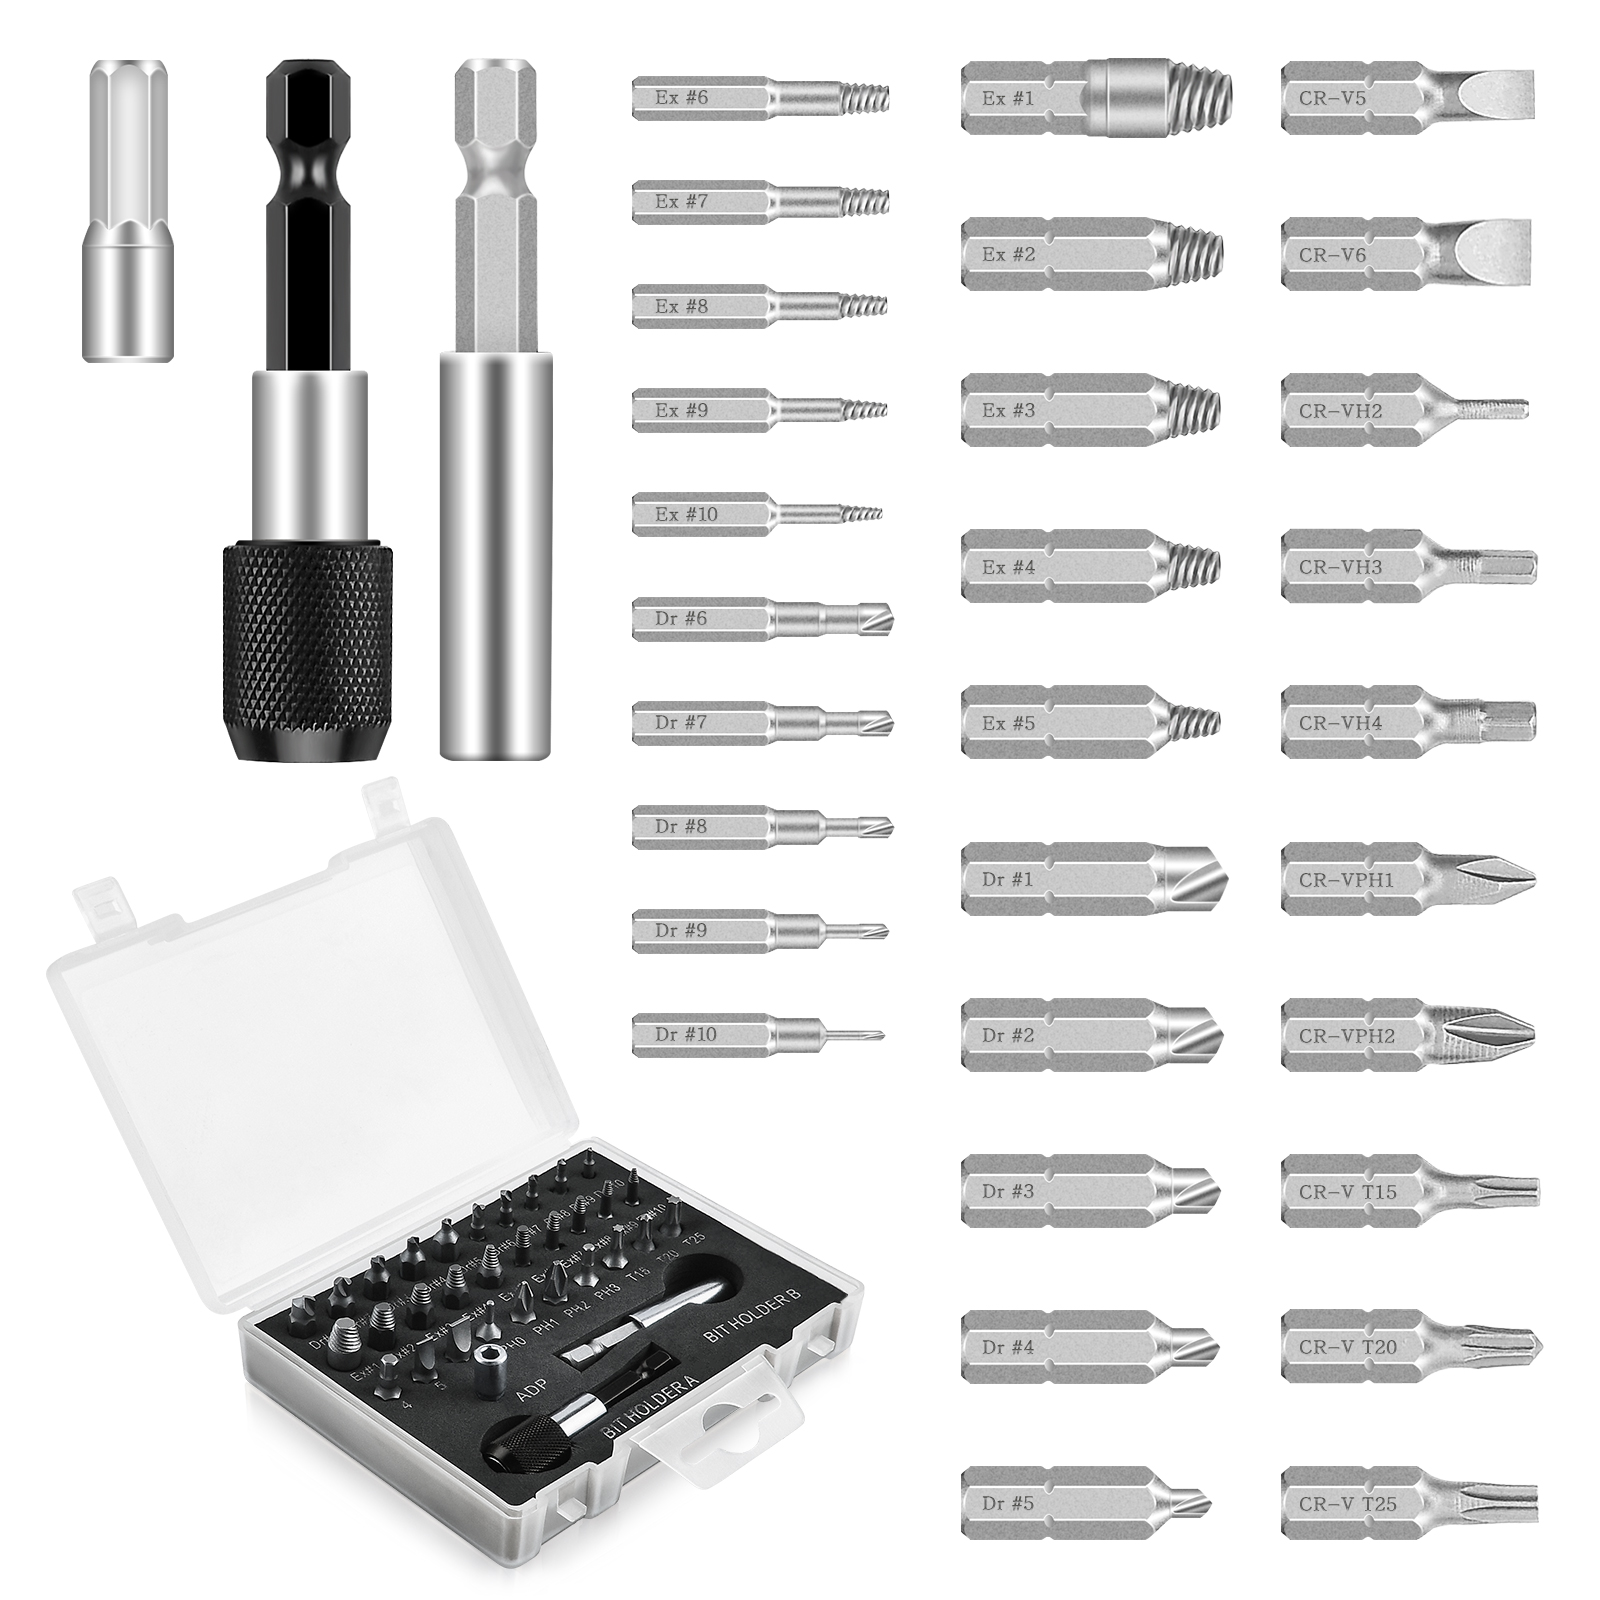 33 PCS Damaged Screw Extractor Set, GOXAWEE Multi-Purpose Easy Out Screw Remover and Bolt Stripped Extractor with Magnetic Extension Bit, for Removing Stripped or Broken Screws Extractor Kit